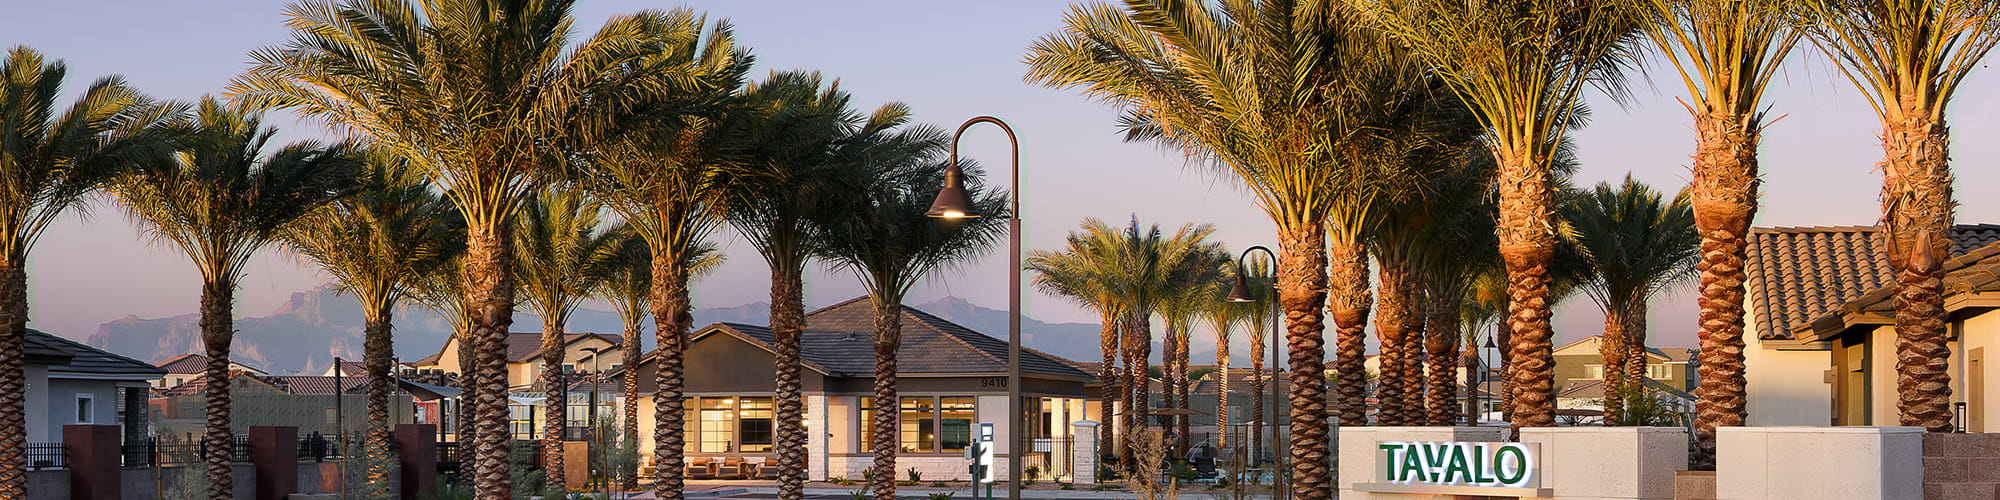 Apply to live at Tavalo Queen Creek in Queen Creek, Arizona